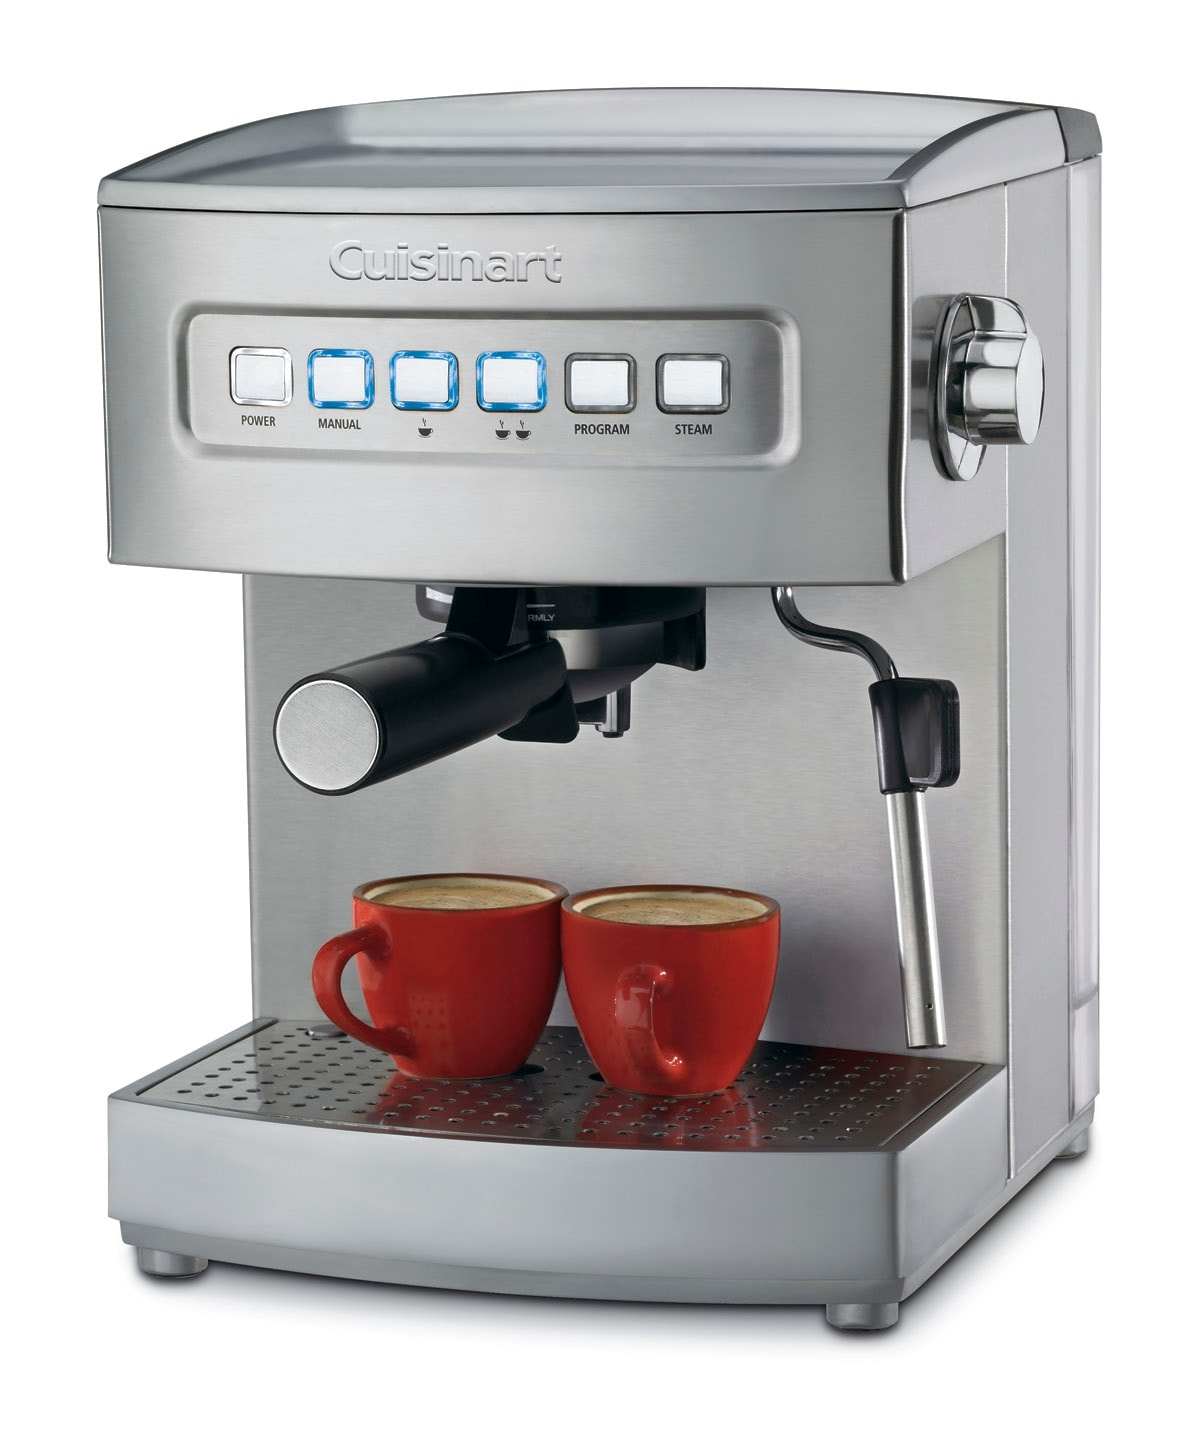 ChefWave Espresso Machine (Red) with Capsule Holder, Cups and Milk Frother